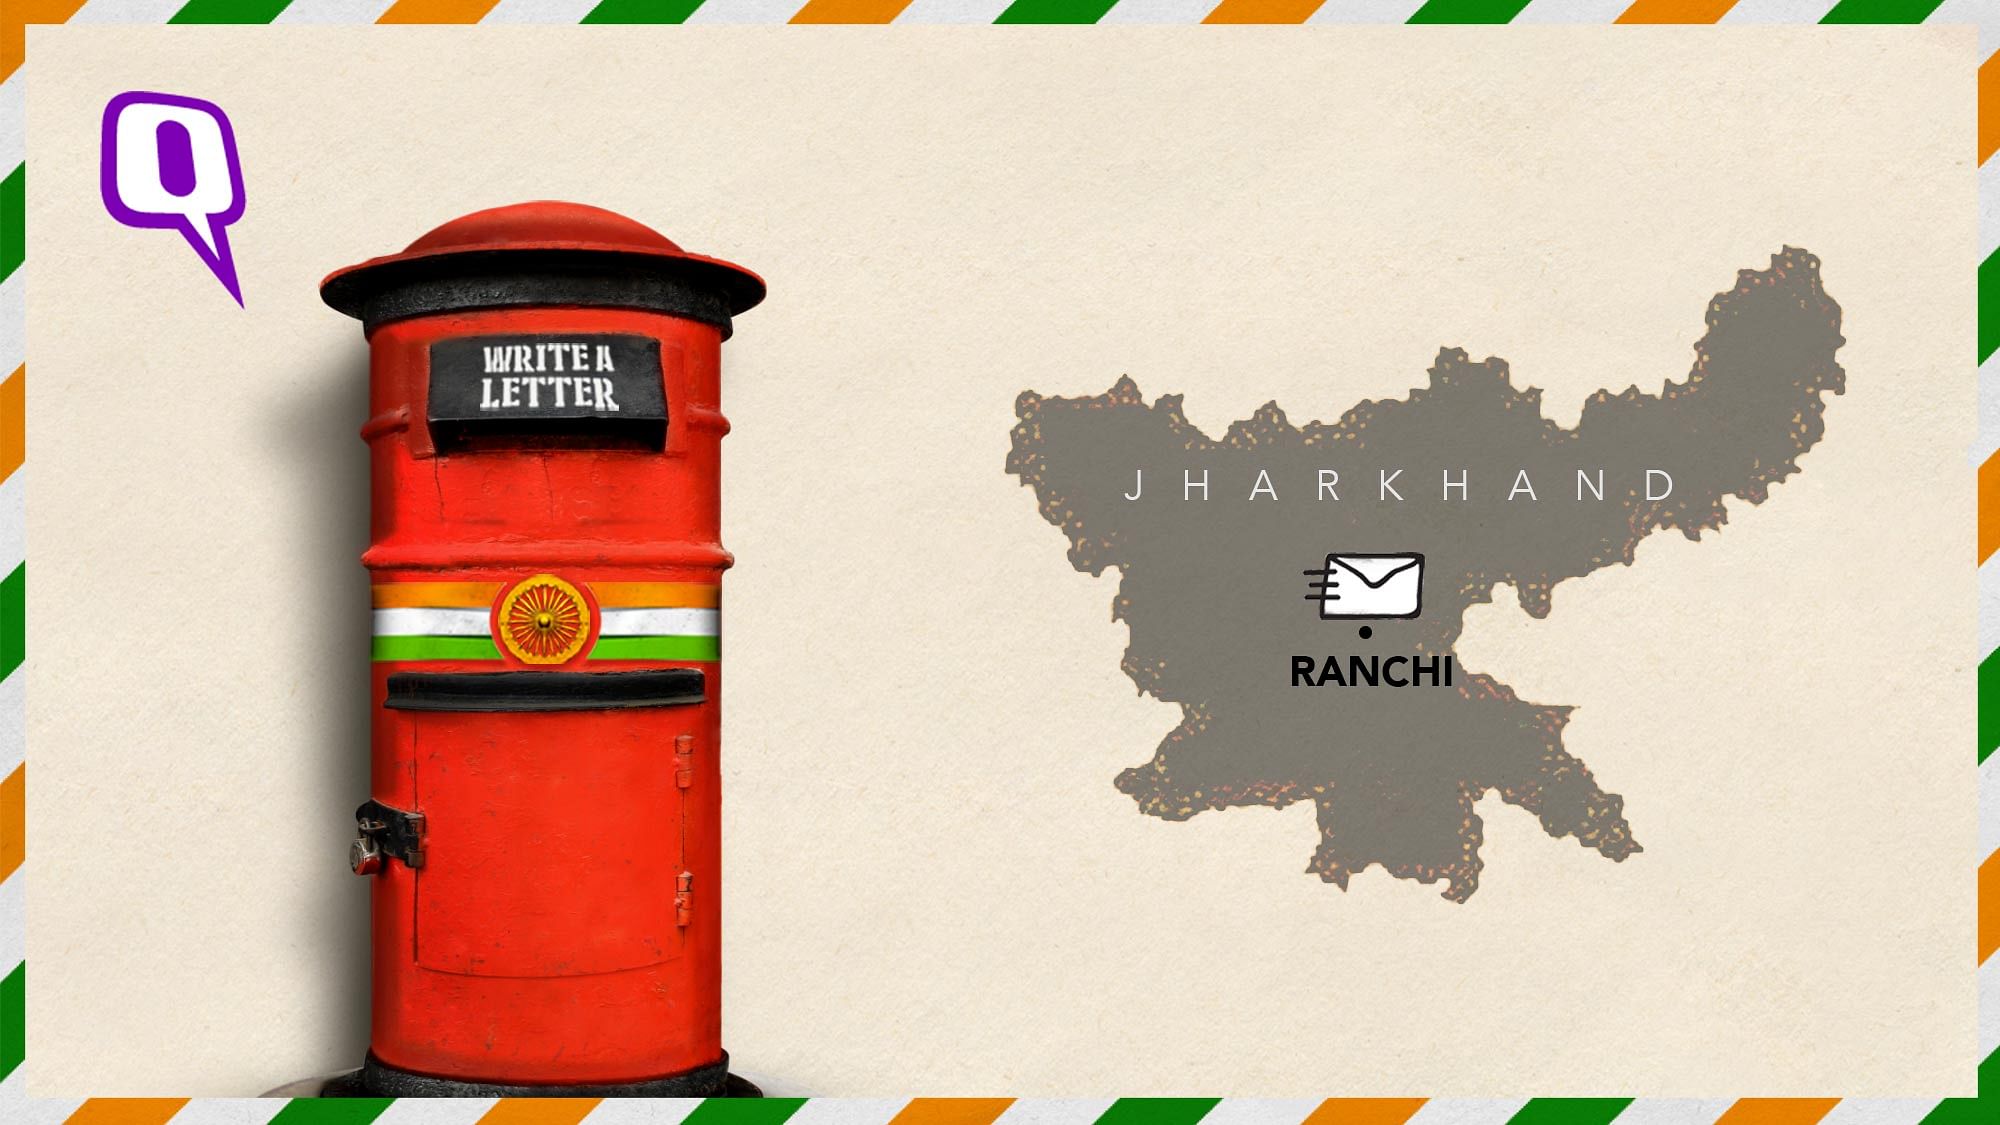 For Republic Day 2020, write your Letter to India.&nbsp;